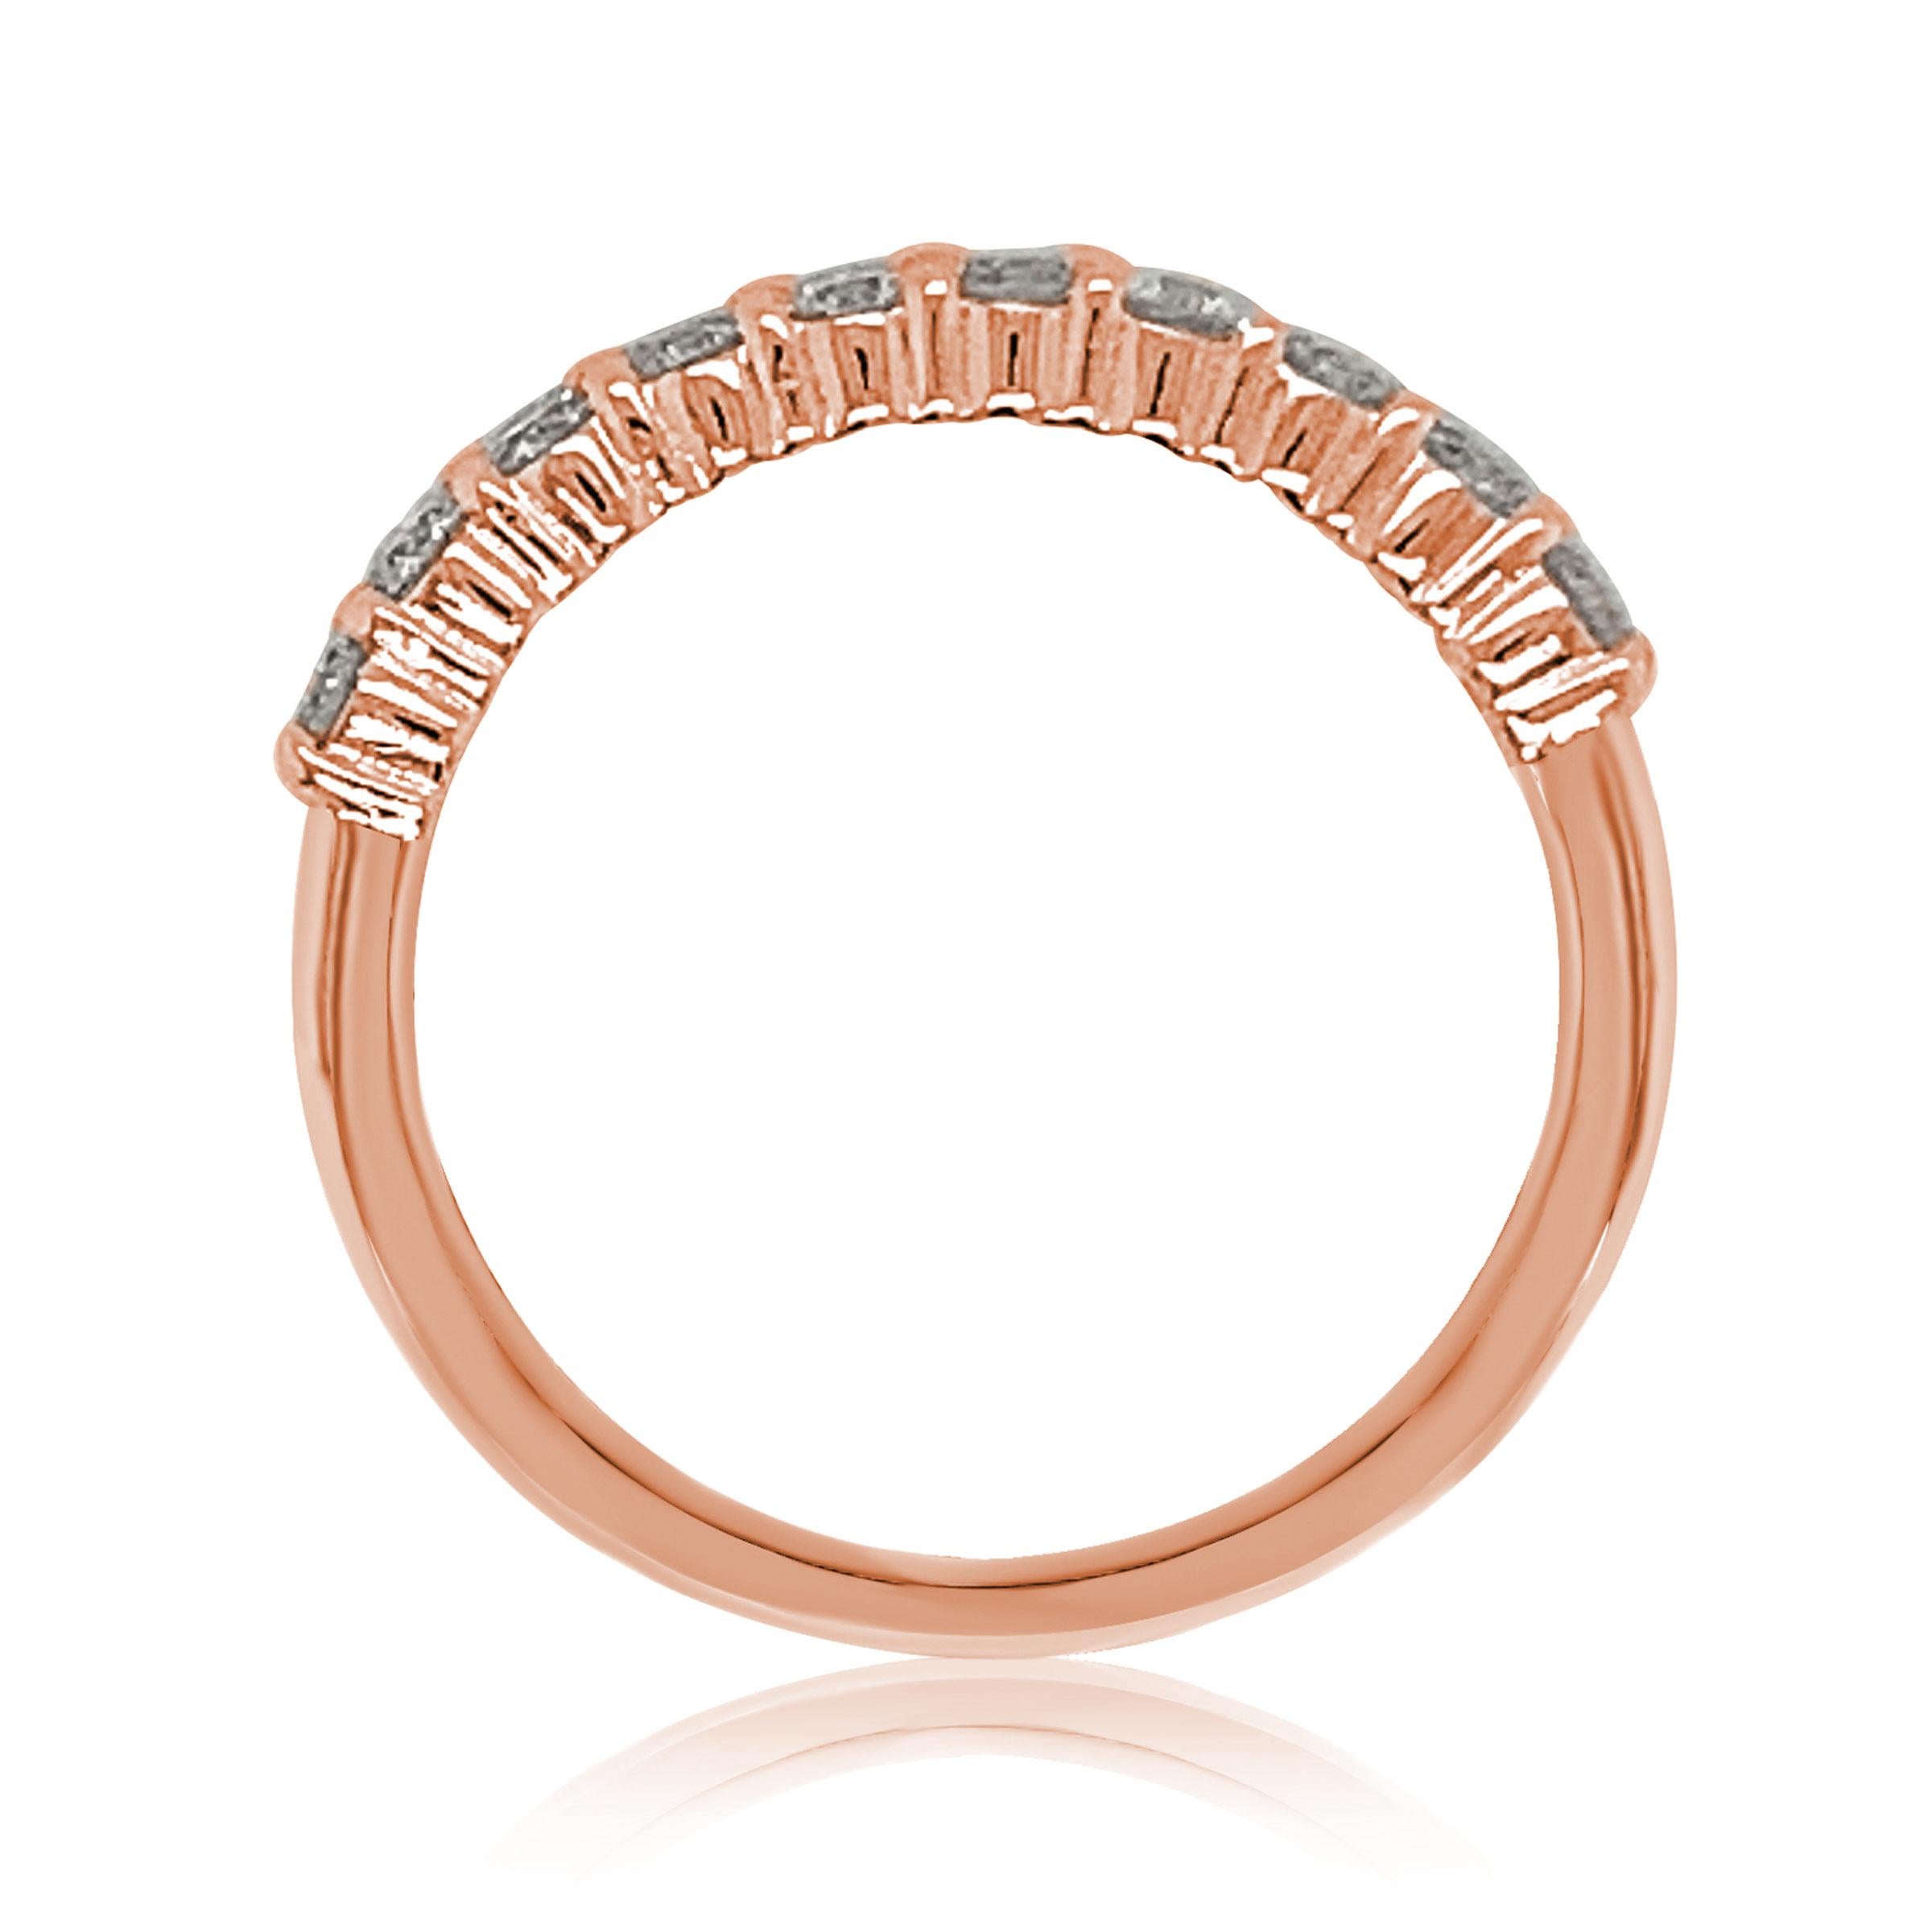 This elegant Suzy Levian diamond half eternity band features a total of ten round cut diamonds (G-H, S1-S2). The diamonds sparkle along half the eternity band, for a sparkle you can't miss with a comfort fit. Designed by Suzy Levian , this 14k rose